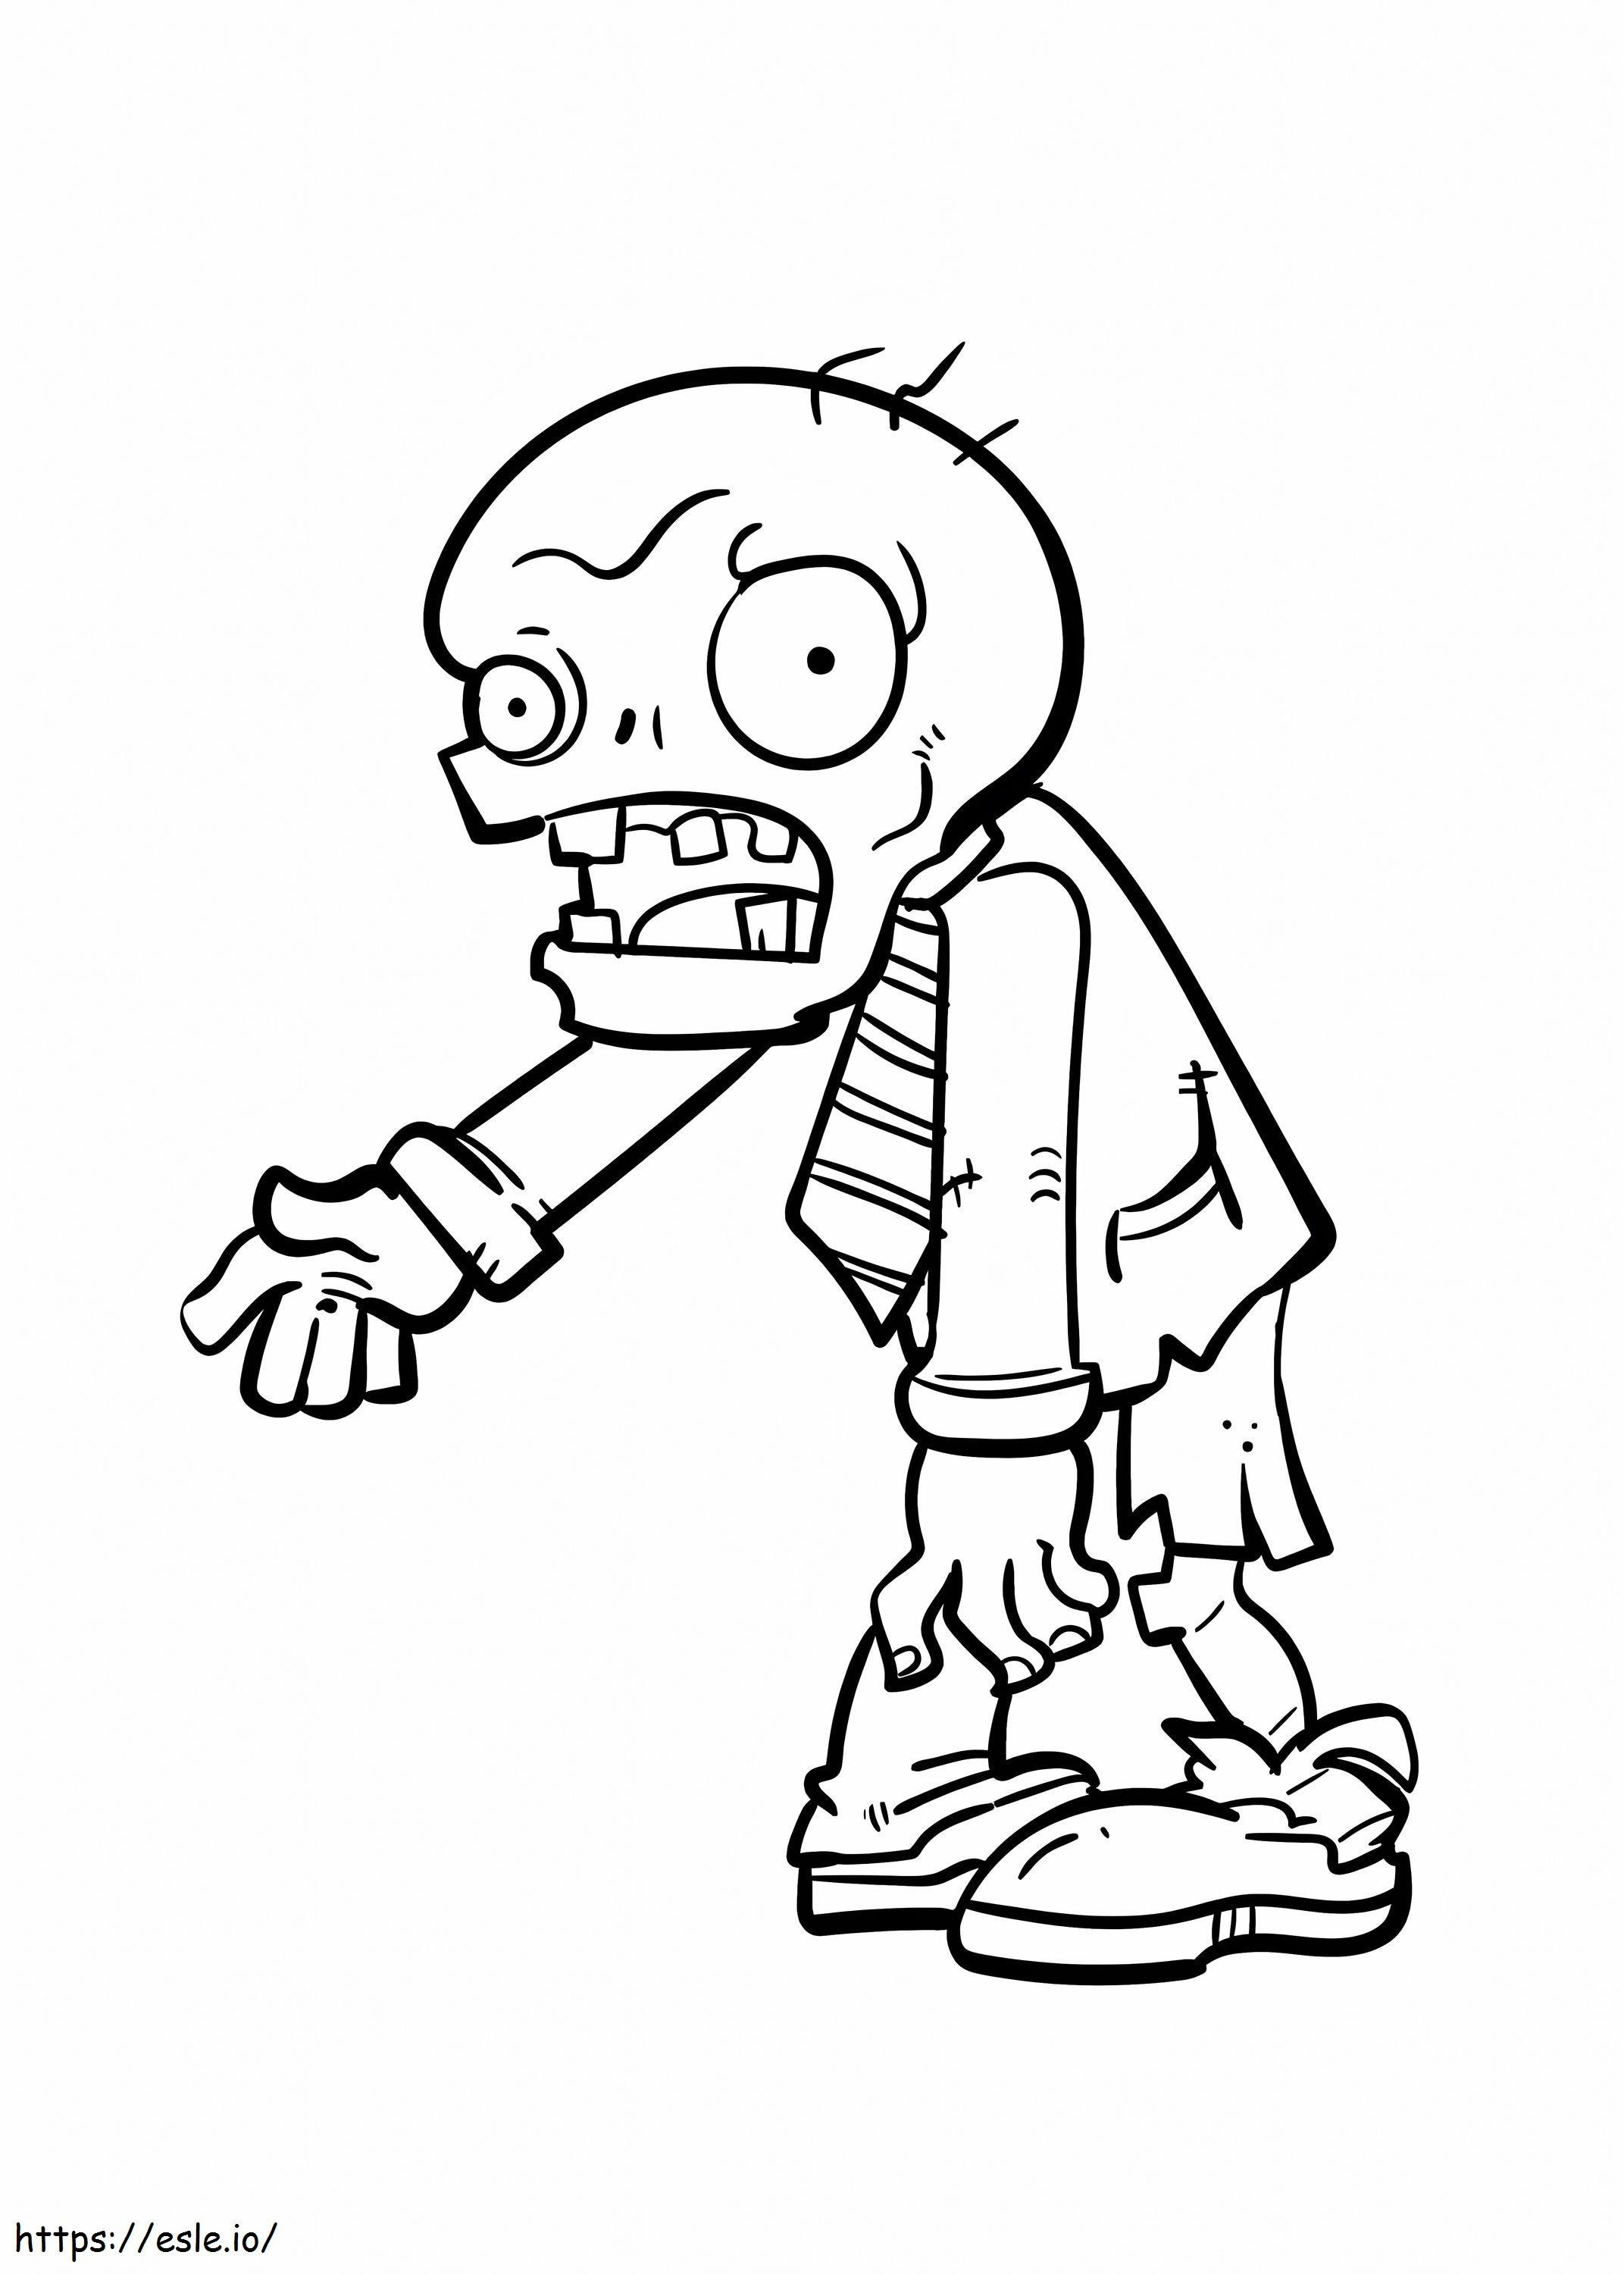 Basic Zombie In Plants Vs Zombies coloring page